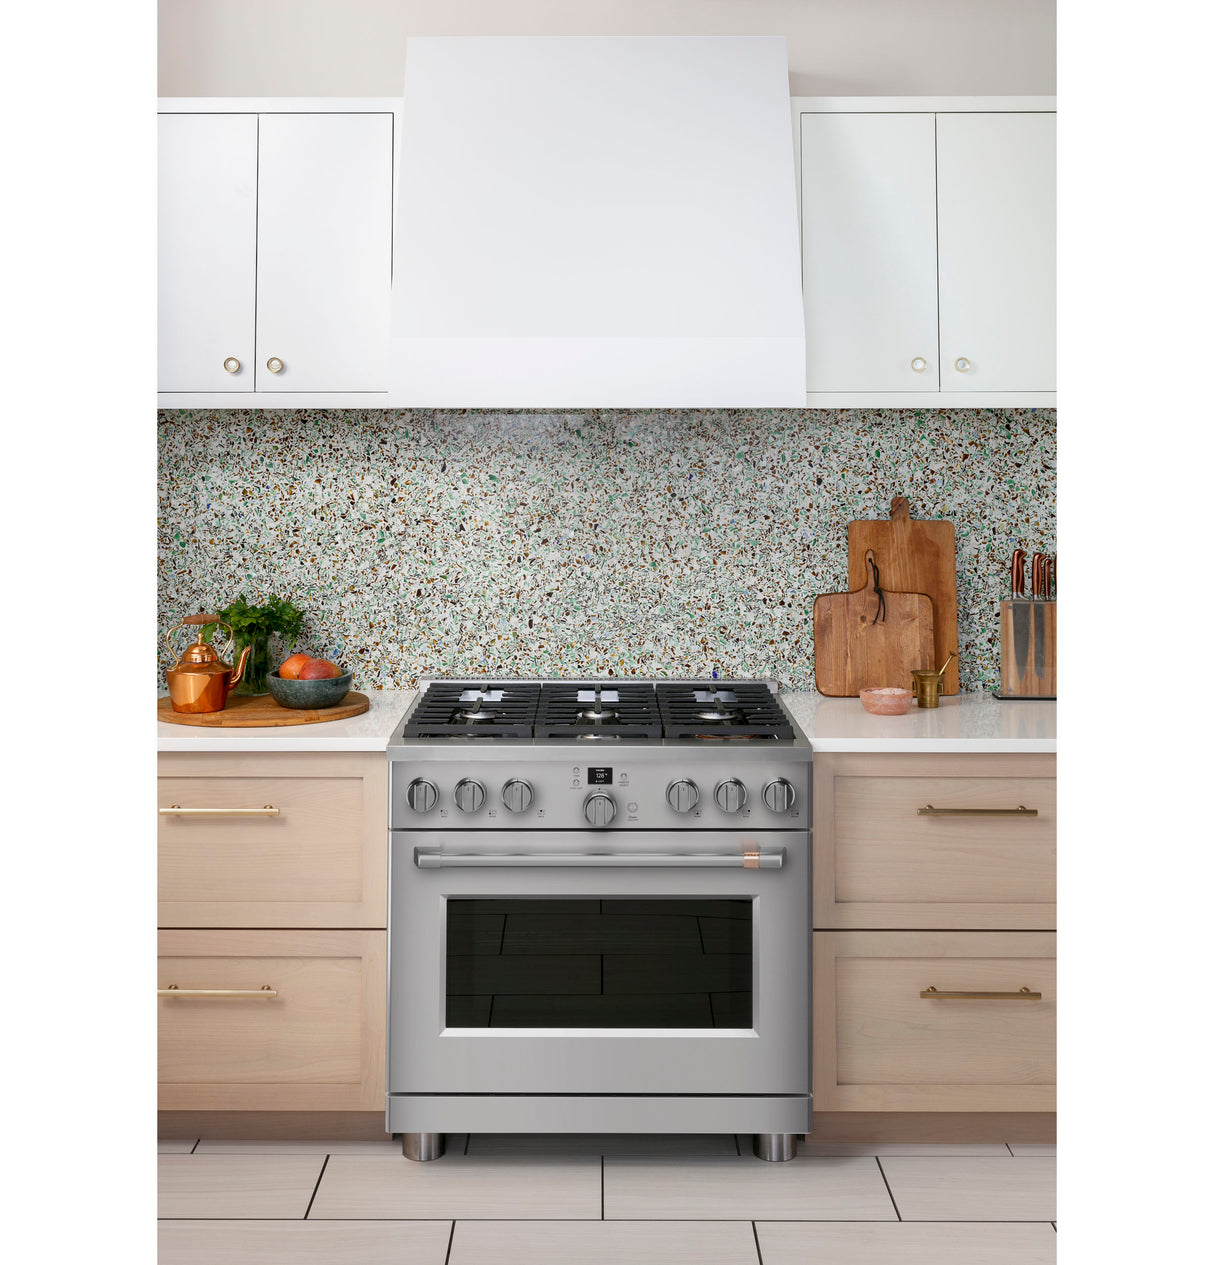 Caf(eback)(TM) 36" Smart All-Gas Commercial-Style Range with 6 Burners (Natural Gas) - (CGY366P2TS1)